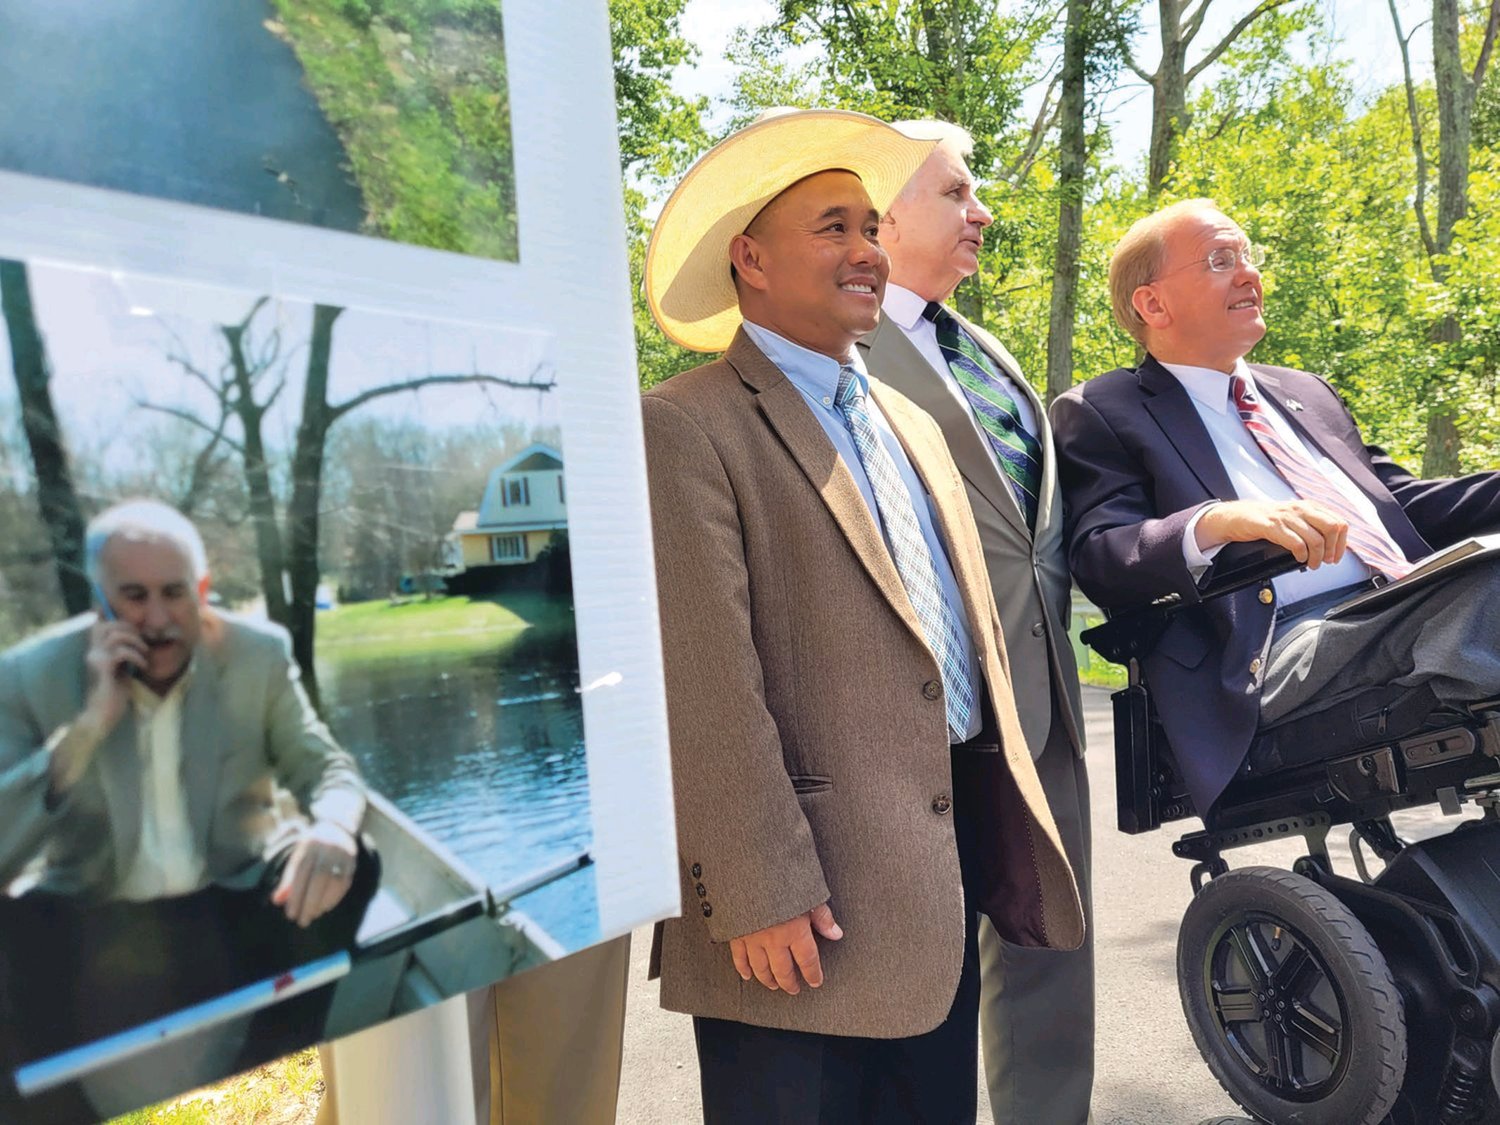 TWO IF BY SEA: In August, Phou Vongkhamdy, U.S. Sen. Jack Reed and U.S. Rep. James Langevin stand near a poster, featuring a photo of Johnston Mayor Joseph M. Polisena in a boat. Members of the Johnston Town Council joined representatives from the United States Department of Agriculture, the Northern Rhode Island Conservation District, U.S. Sen. Jack Reed (D-Rhode Island), U.S. Rep. James Langevin (D-Rhode Island), and state Rep. Deborah Fellela (D-Johnston), at an event near 68 Belfield Drive, Johnston, to celebrate the completion of a floodplain restoration project, aimed at eliminating future flooding.